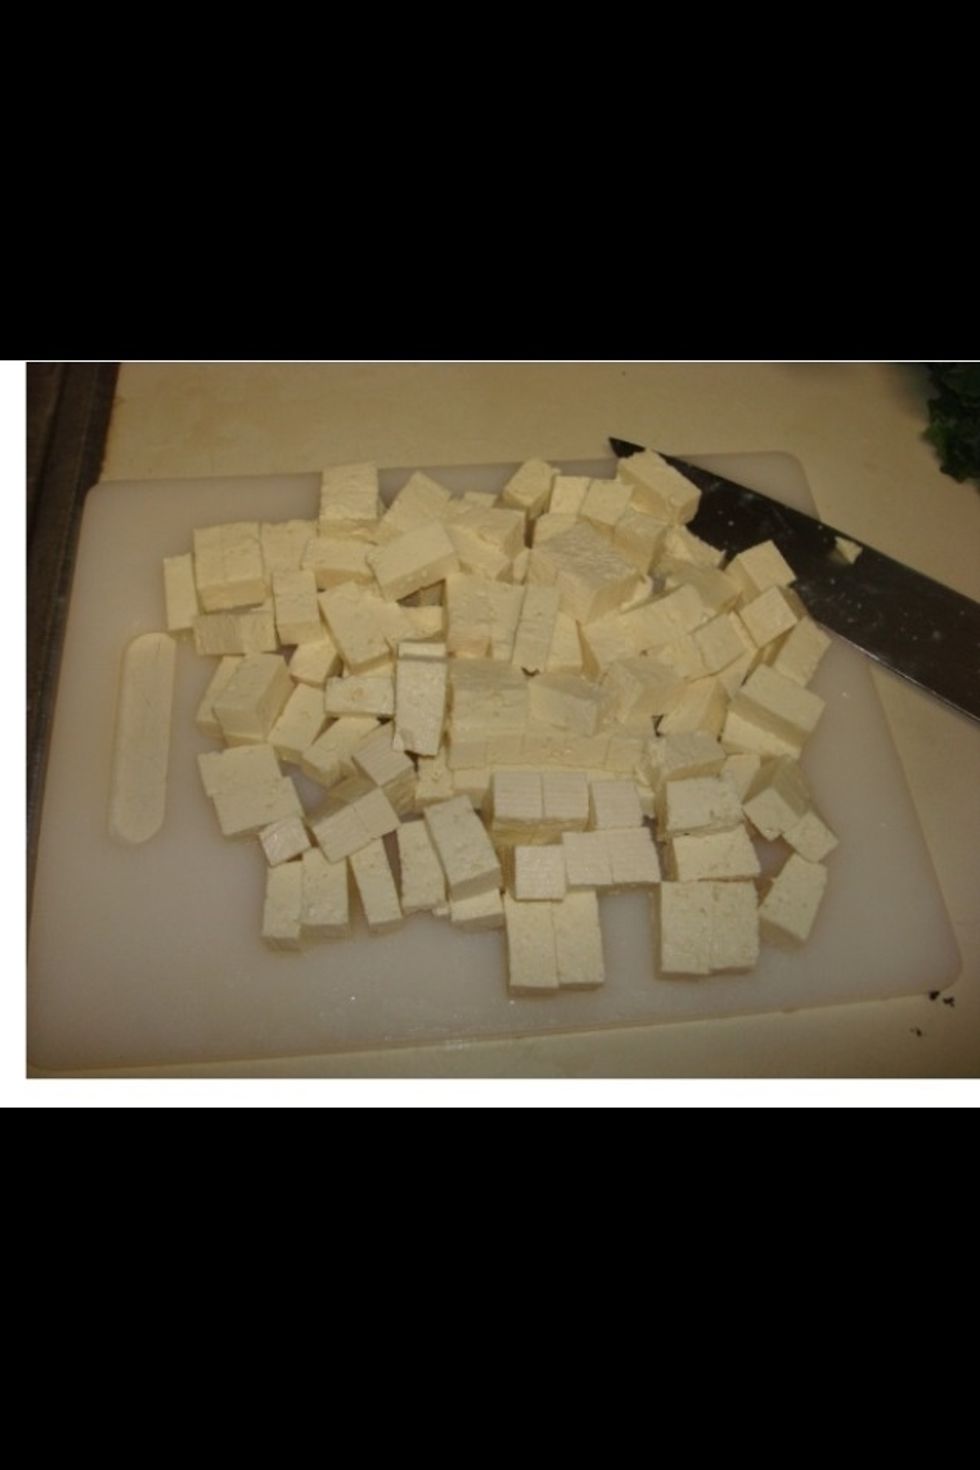 While the rice cooks, prepare the other ingredients.  Start by removing the tofu from the package, draining, rinsing and cubing.